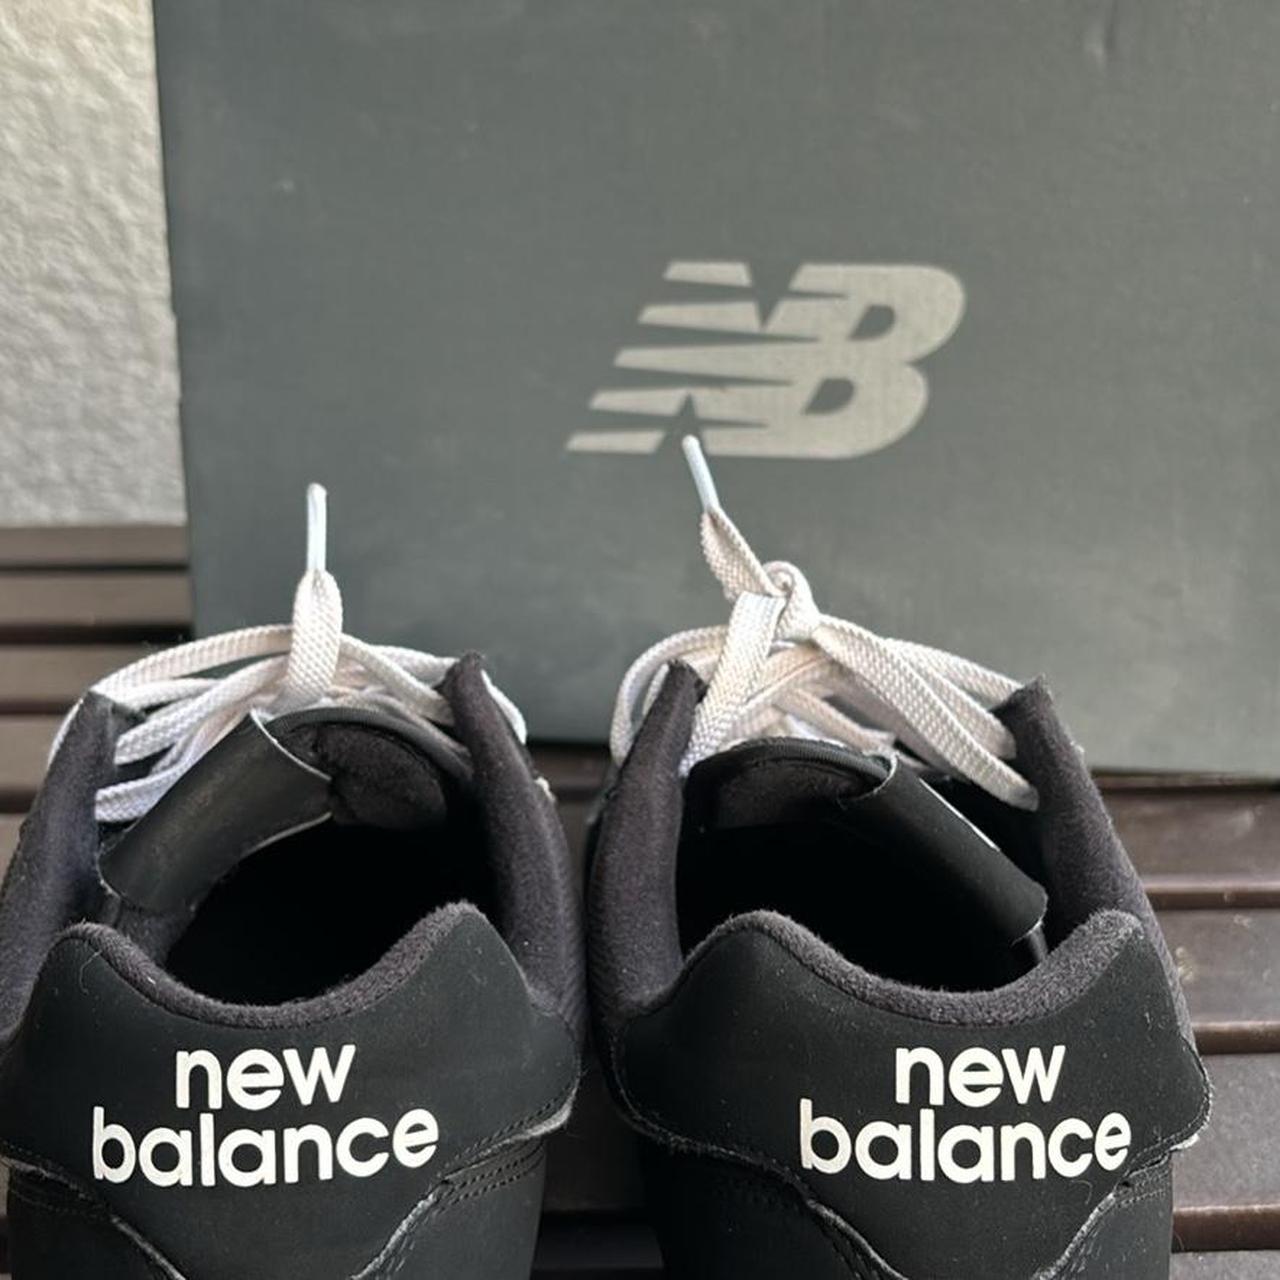 New Balance Men's Black and Grey Trainers (8)